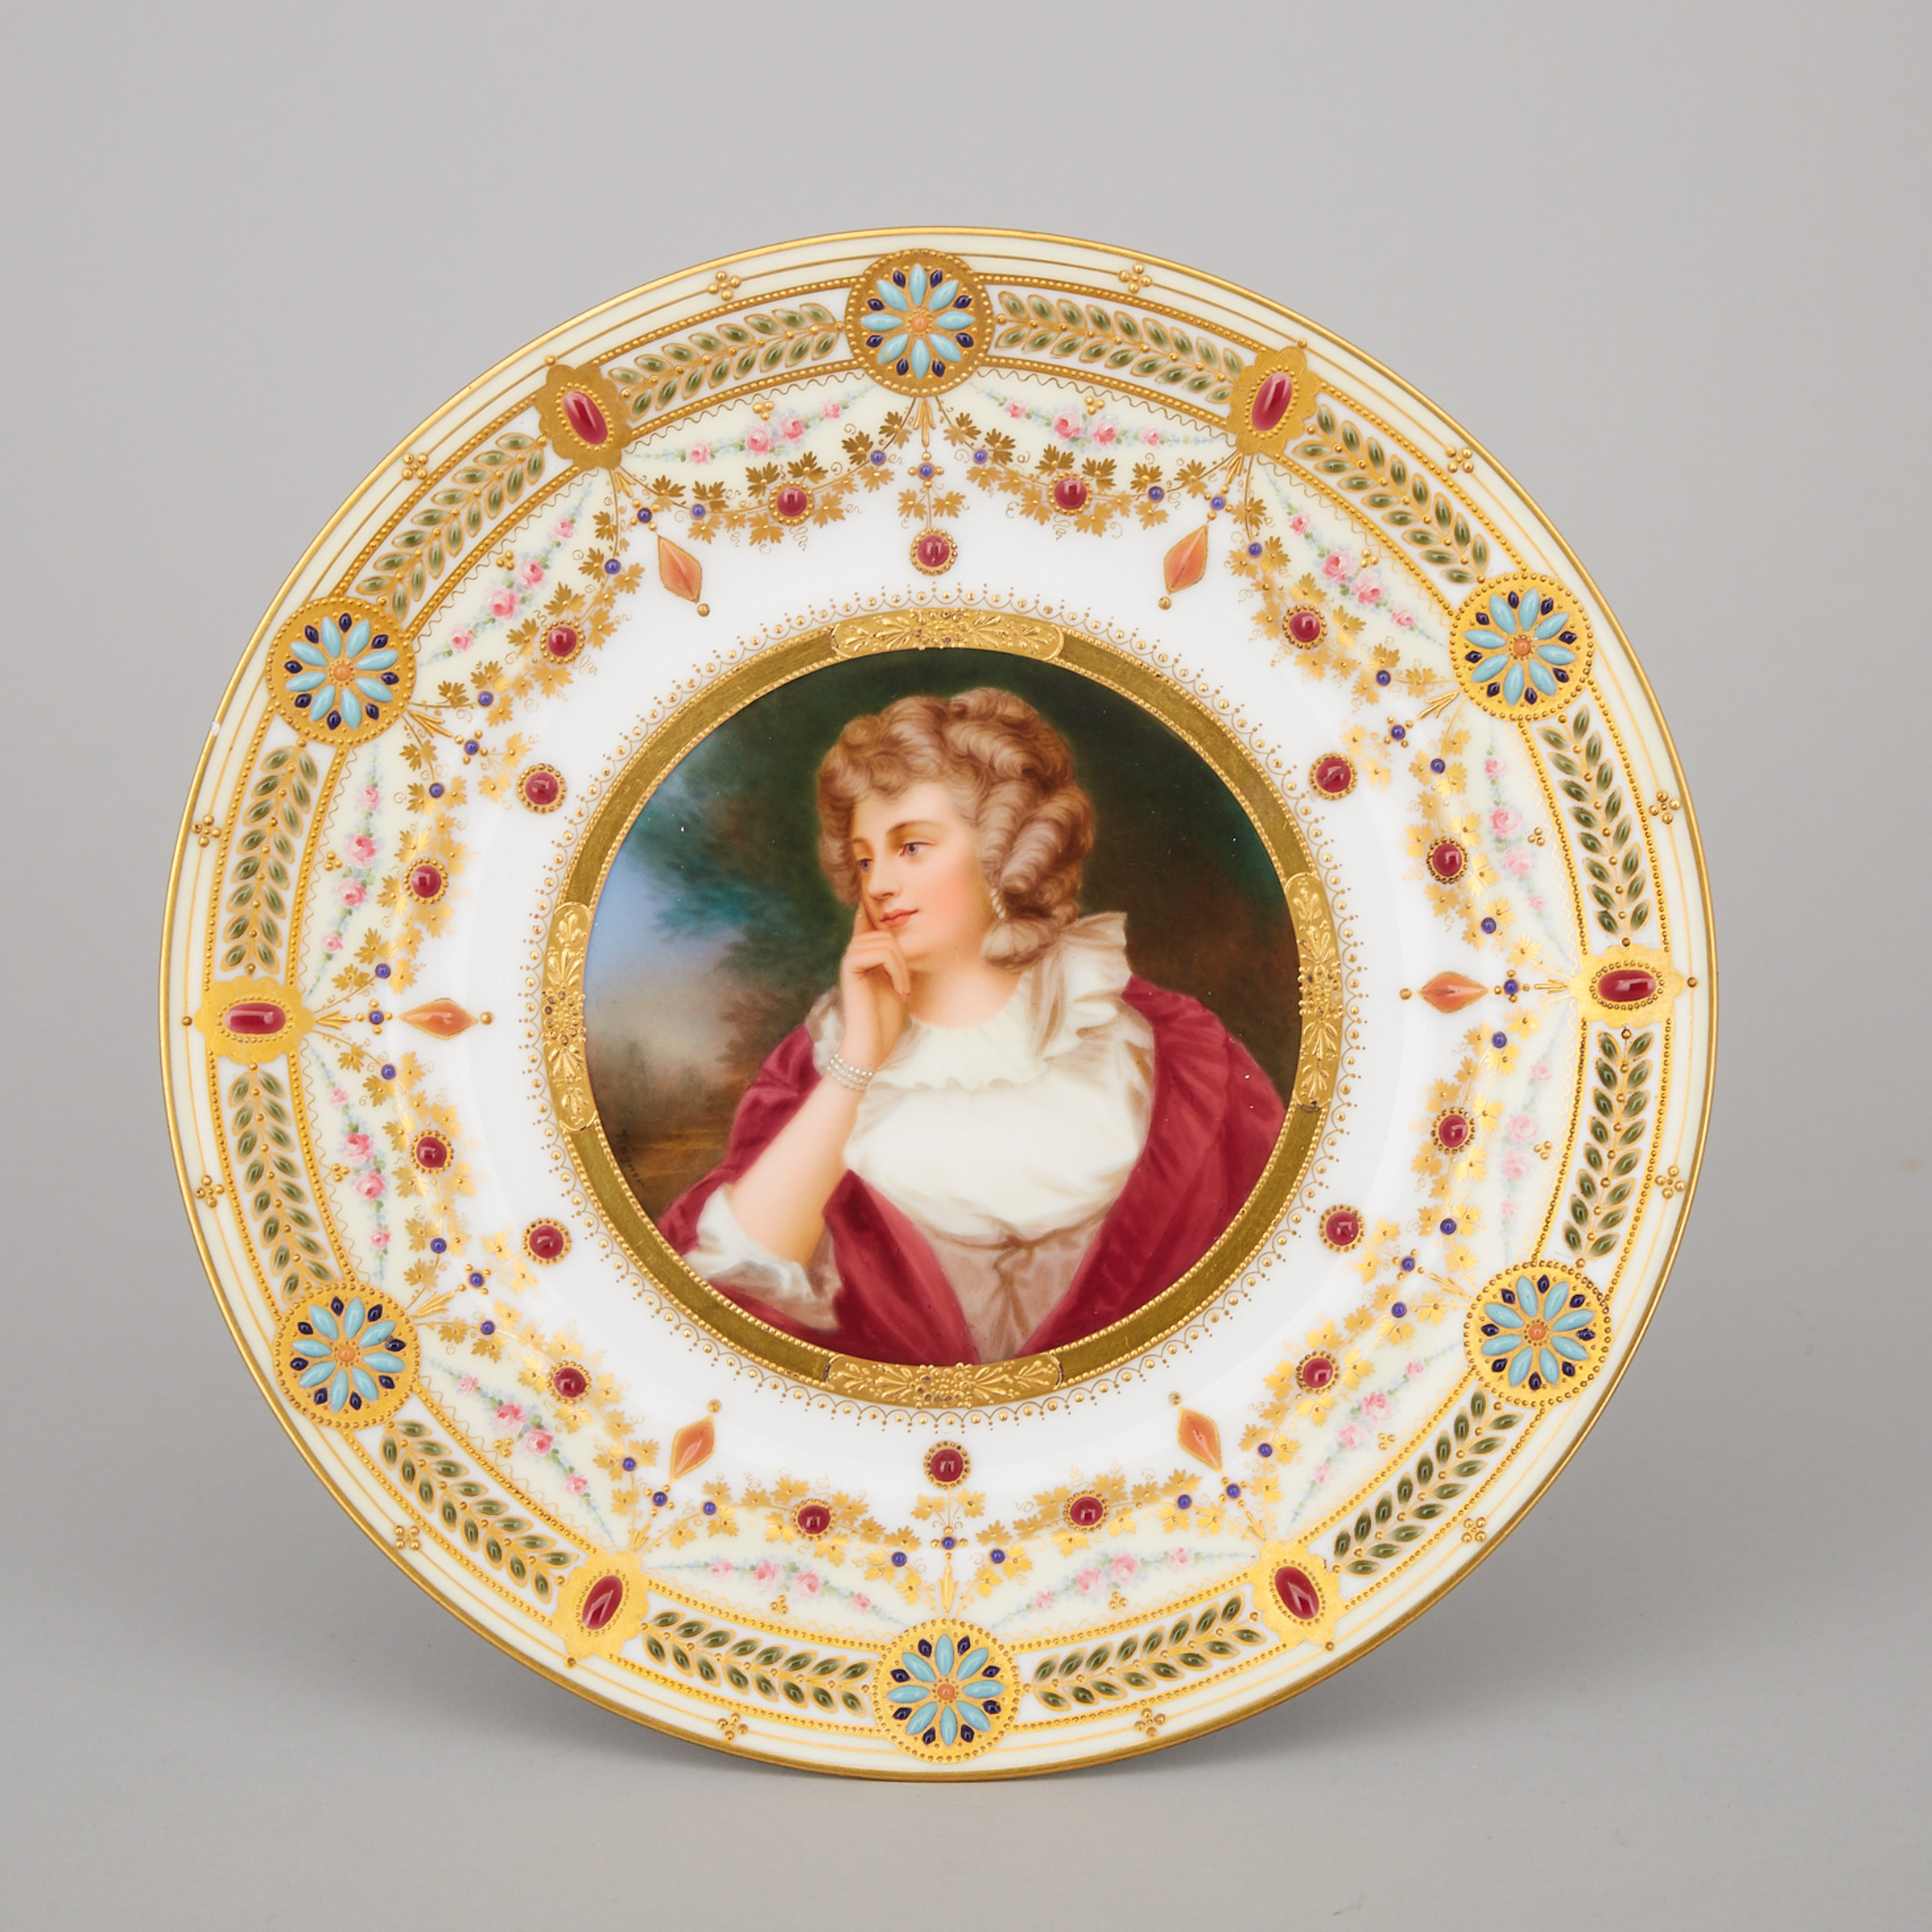 Dresden 'Jeweled' Portrait Plate, early 20th century